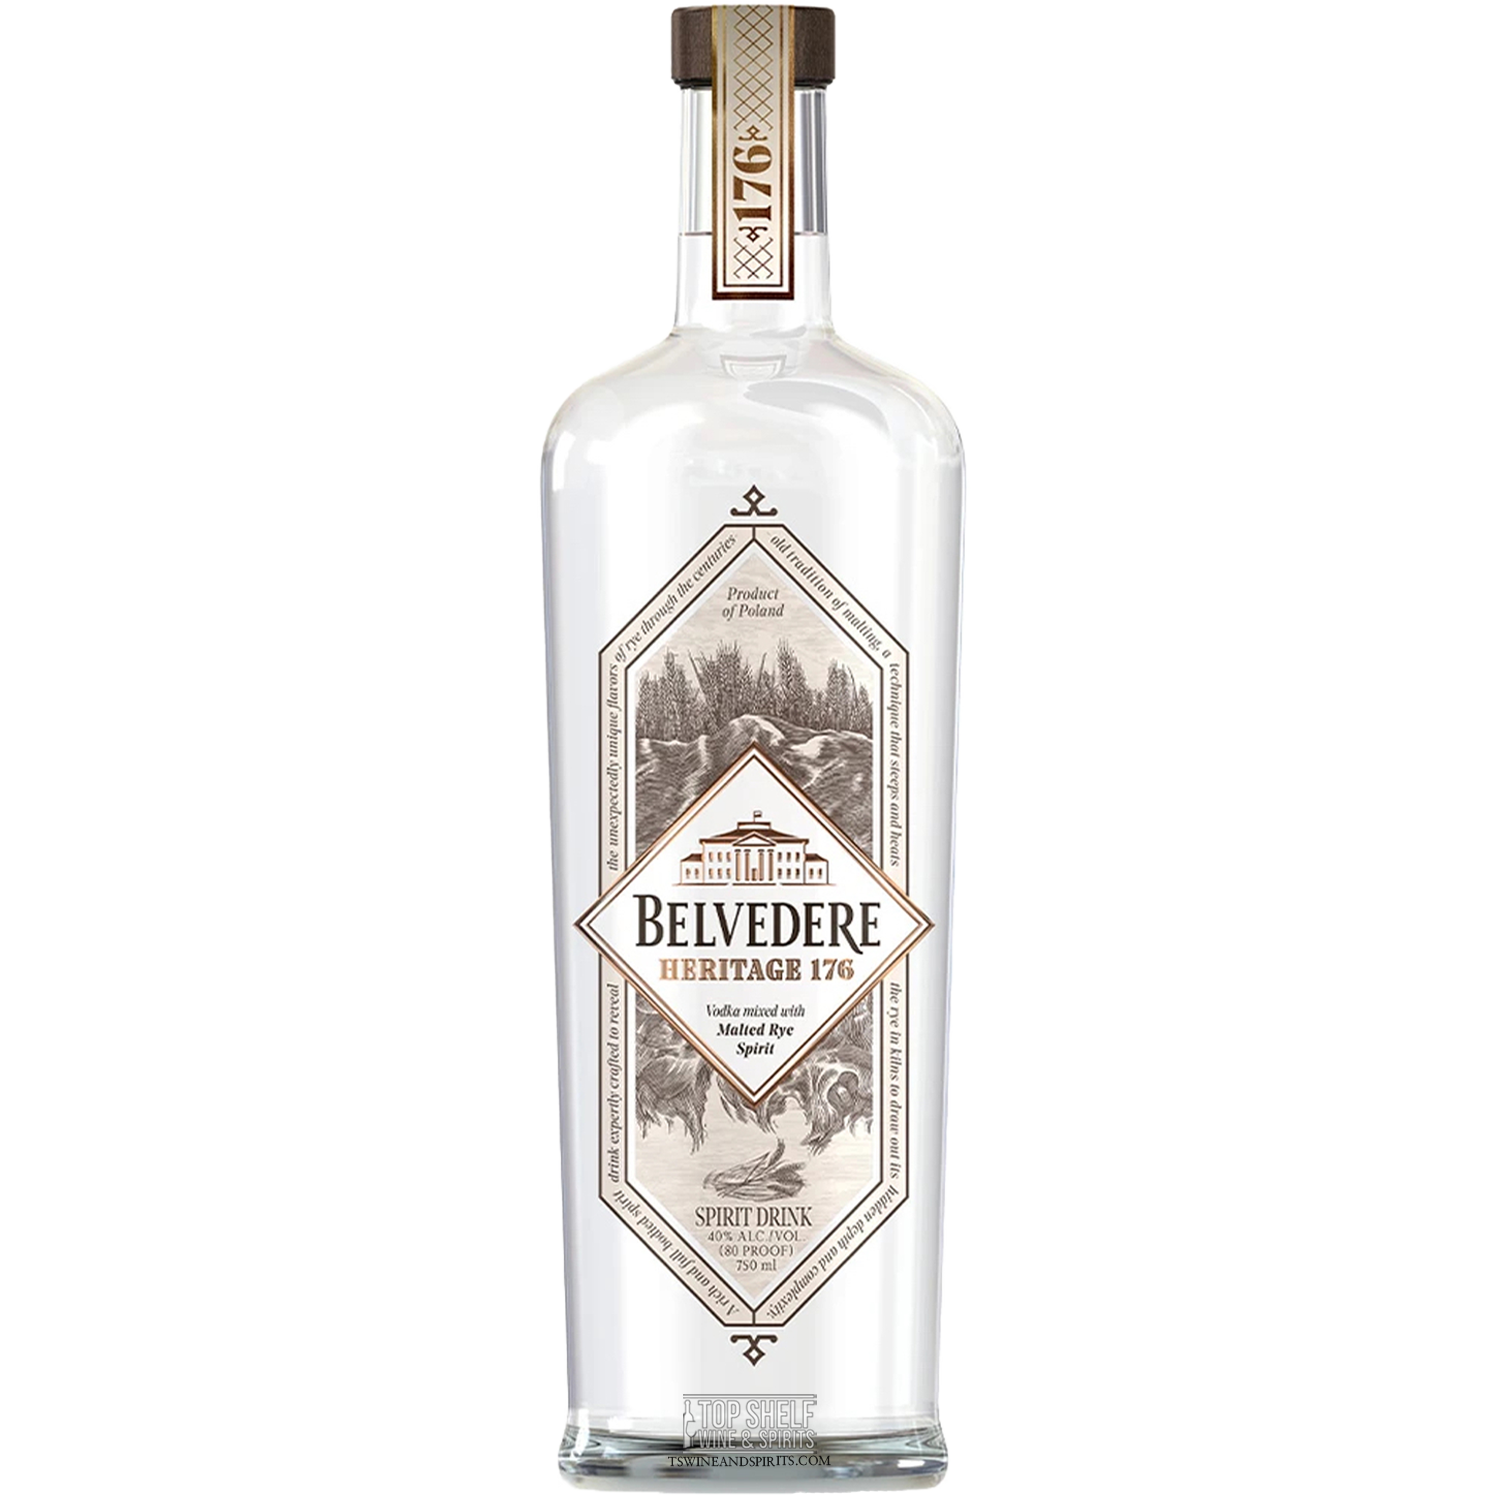 Belvedere Vodka's new campaign relies on heritage, authenticity